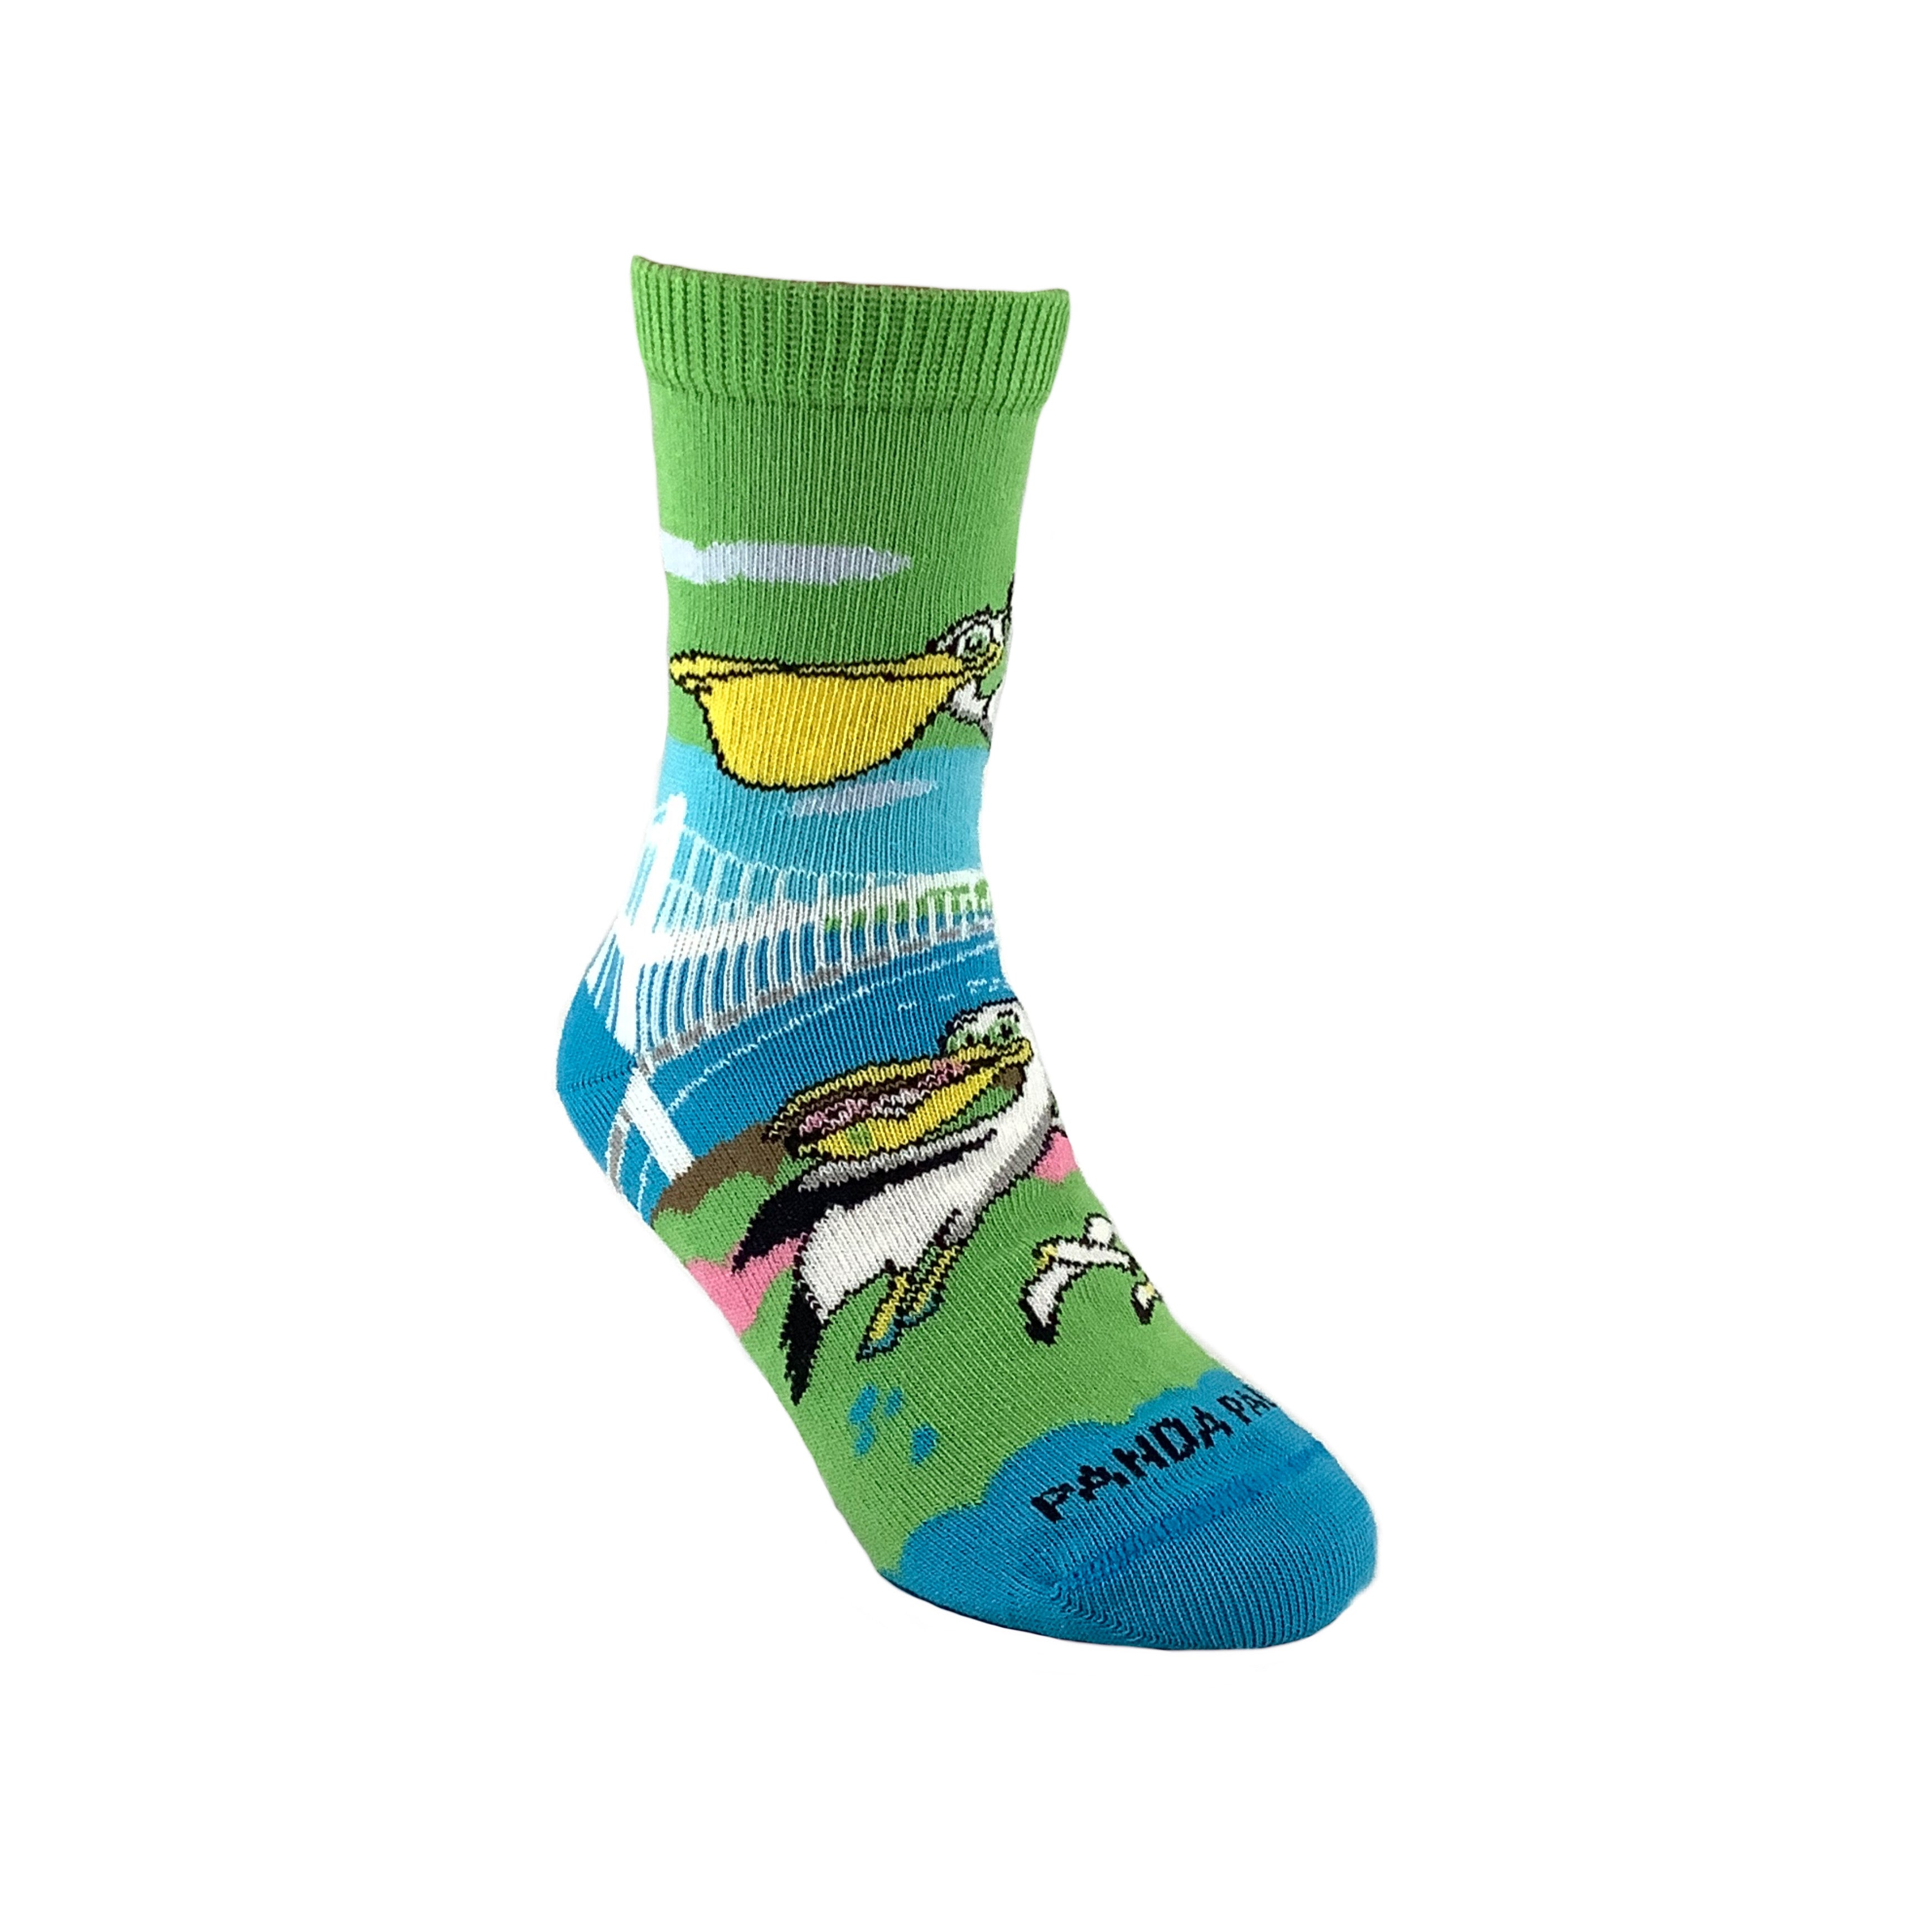 Pelican Flying Over The Bridge Sock (Ages 3-7) from the Sock Panda